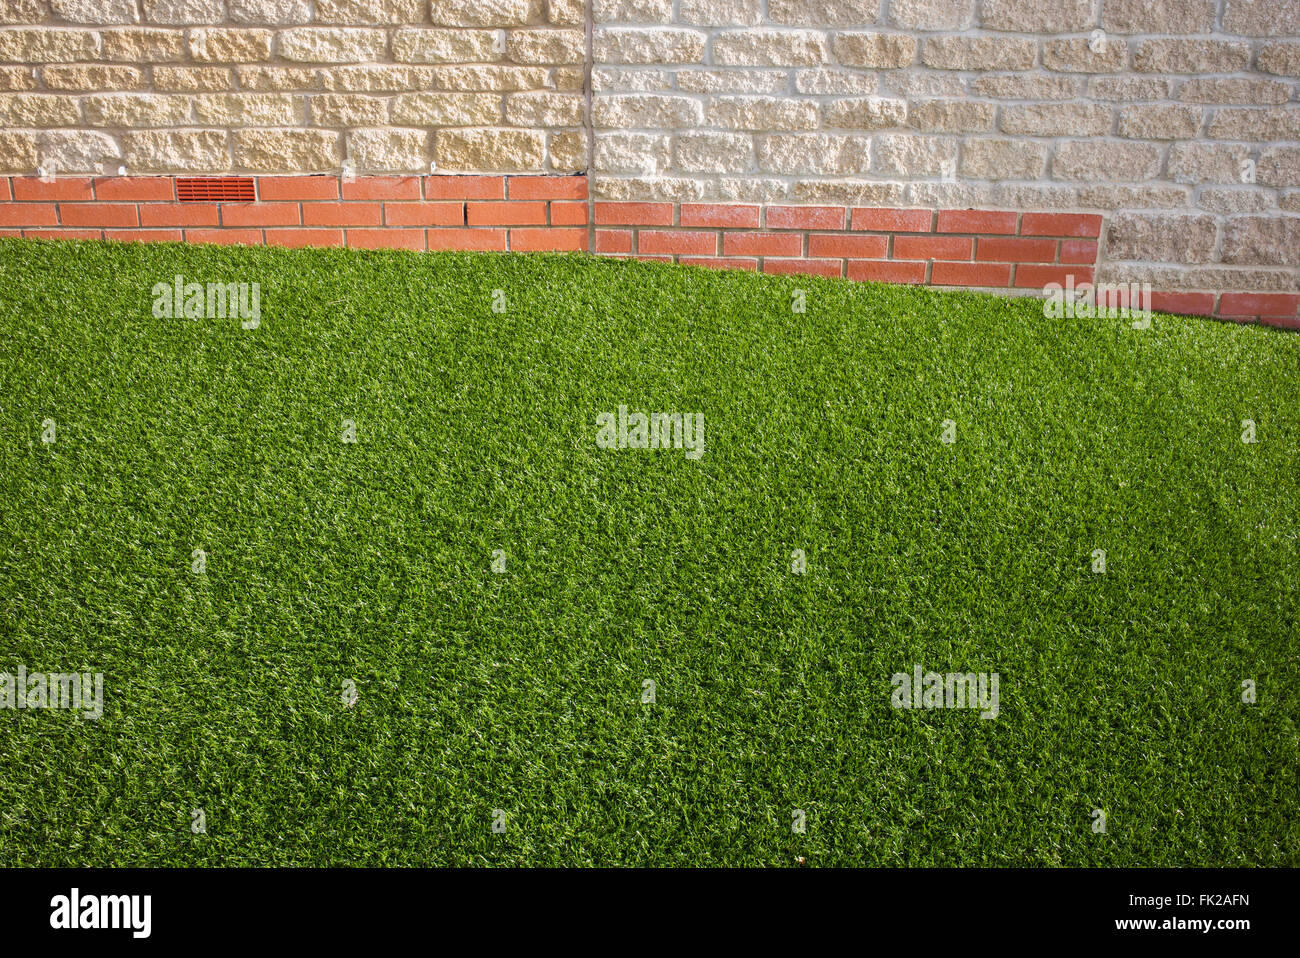 Artificial grass / astro turf on a new build housing estate. Bicester, Oxfordshire, England Stock Photo